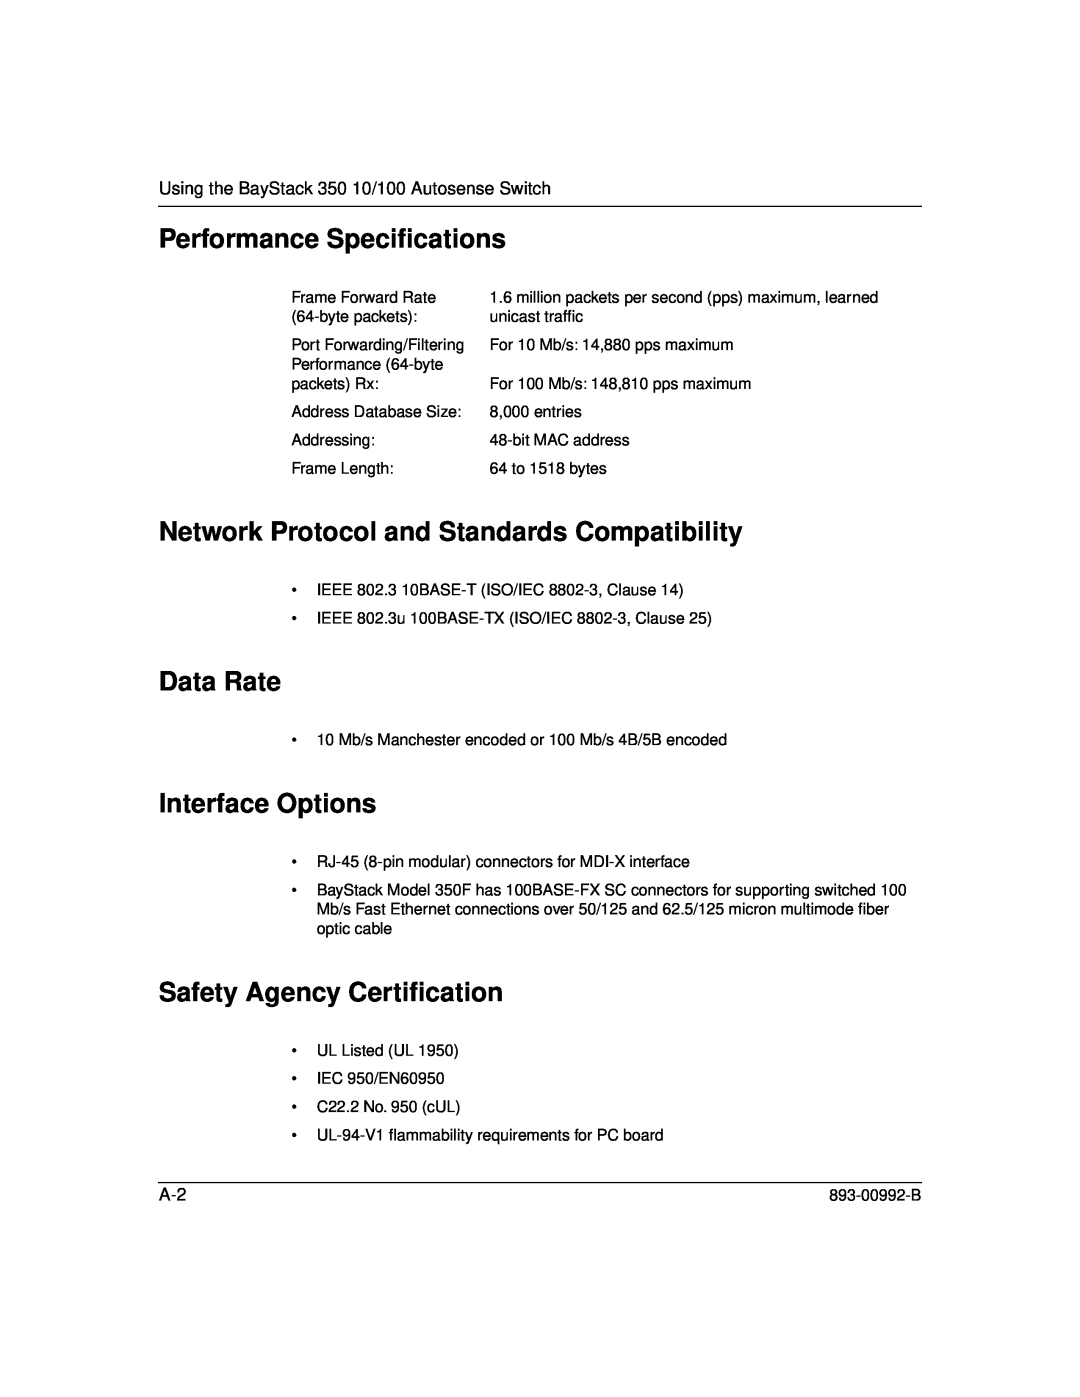 Bay Technical Associates 350 manual Performance Speciﬁcations, Network Protocol and Standards Compatibility, Data Rate 